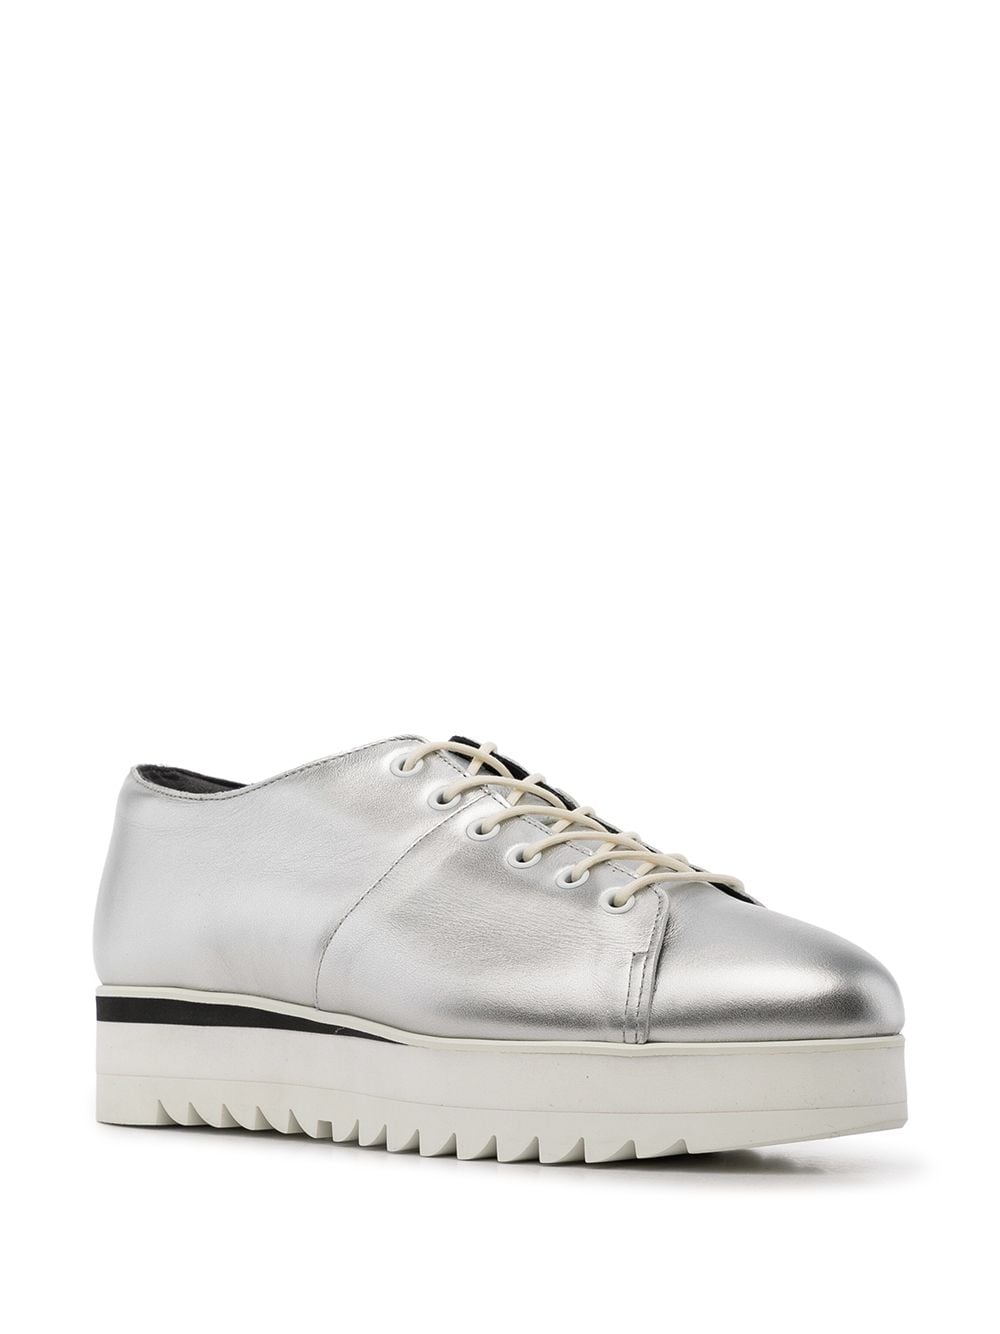 Image 2 of Onitsuka Tiger metallic leather lace-up shoes